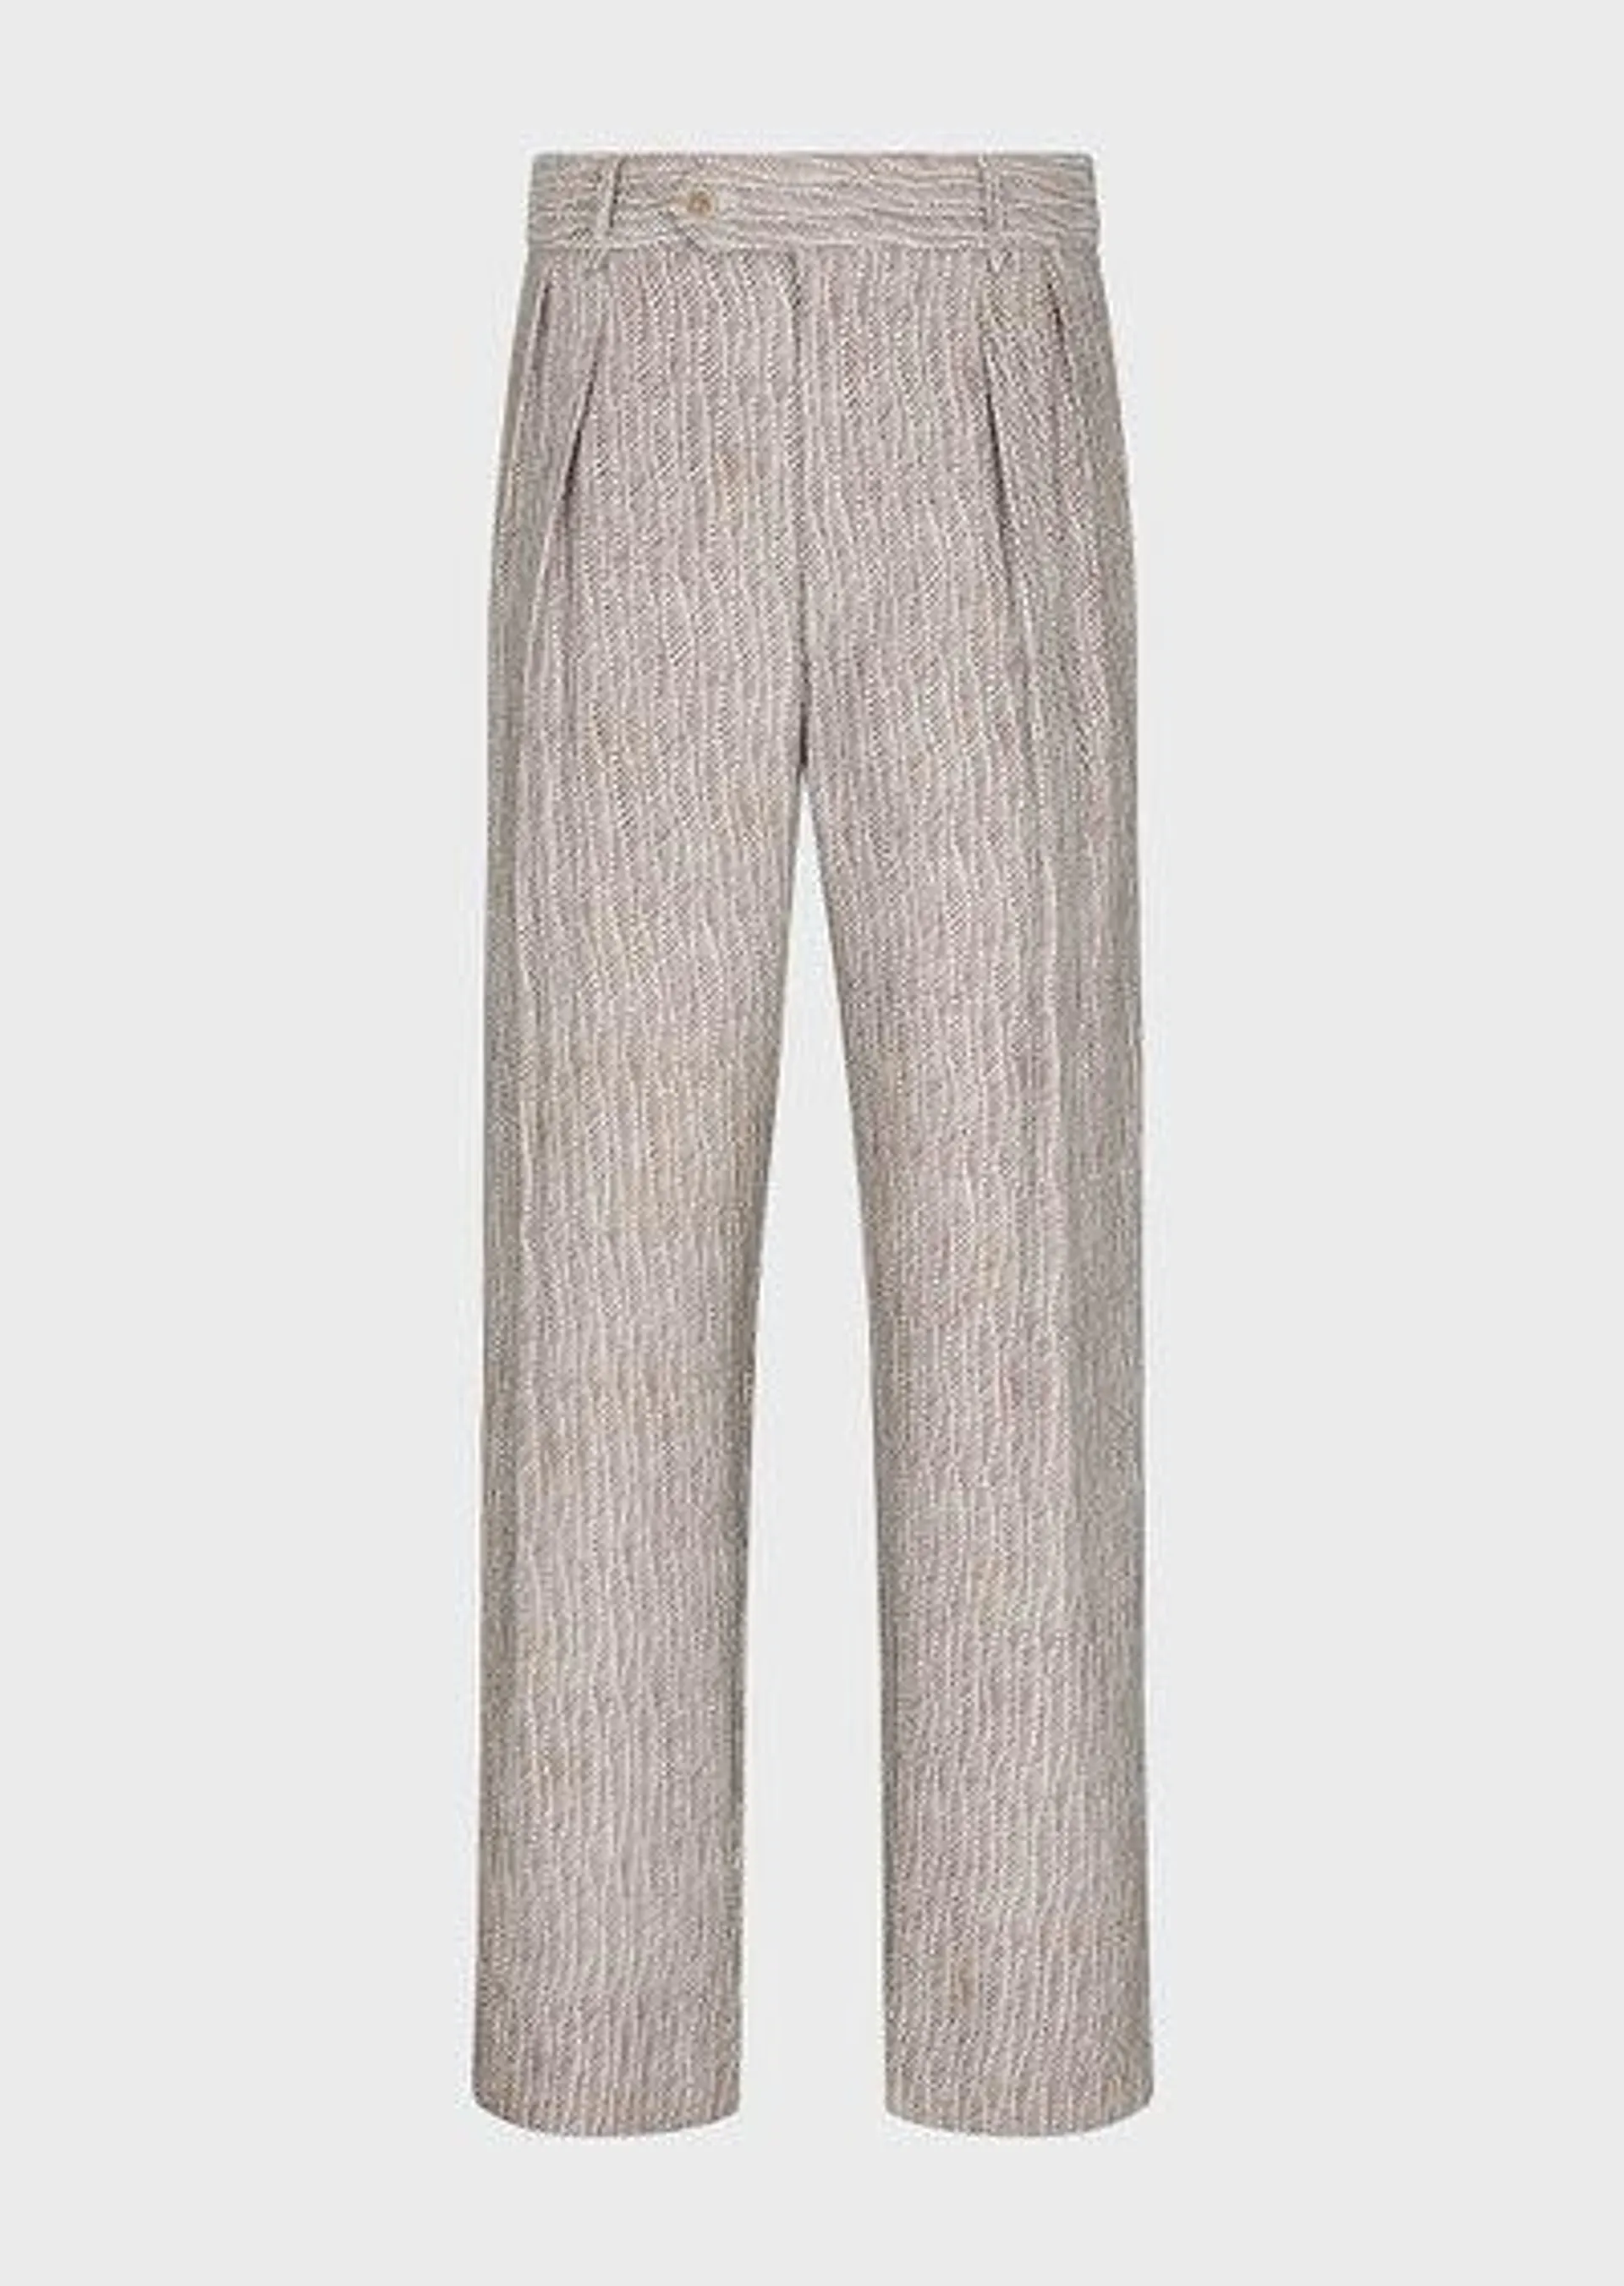 Two-pleat trousers in eco-sustainable printed cupro